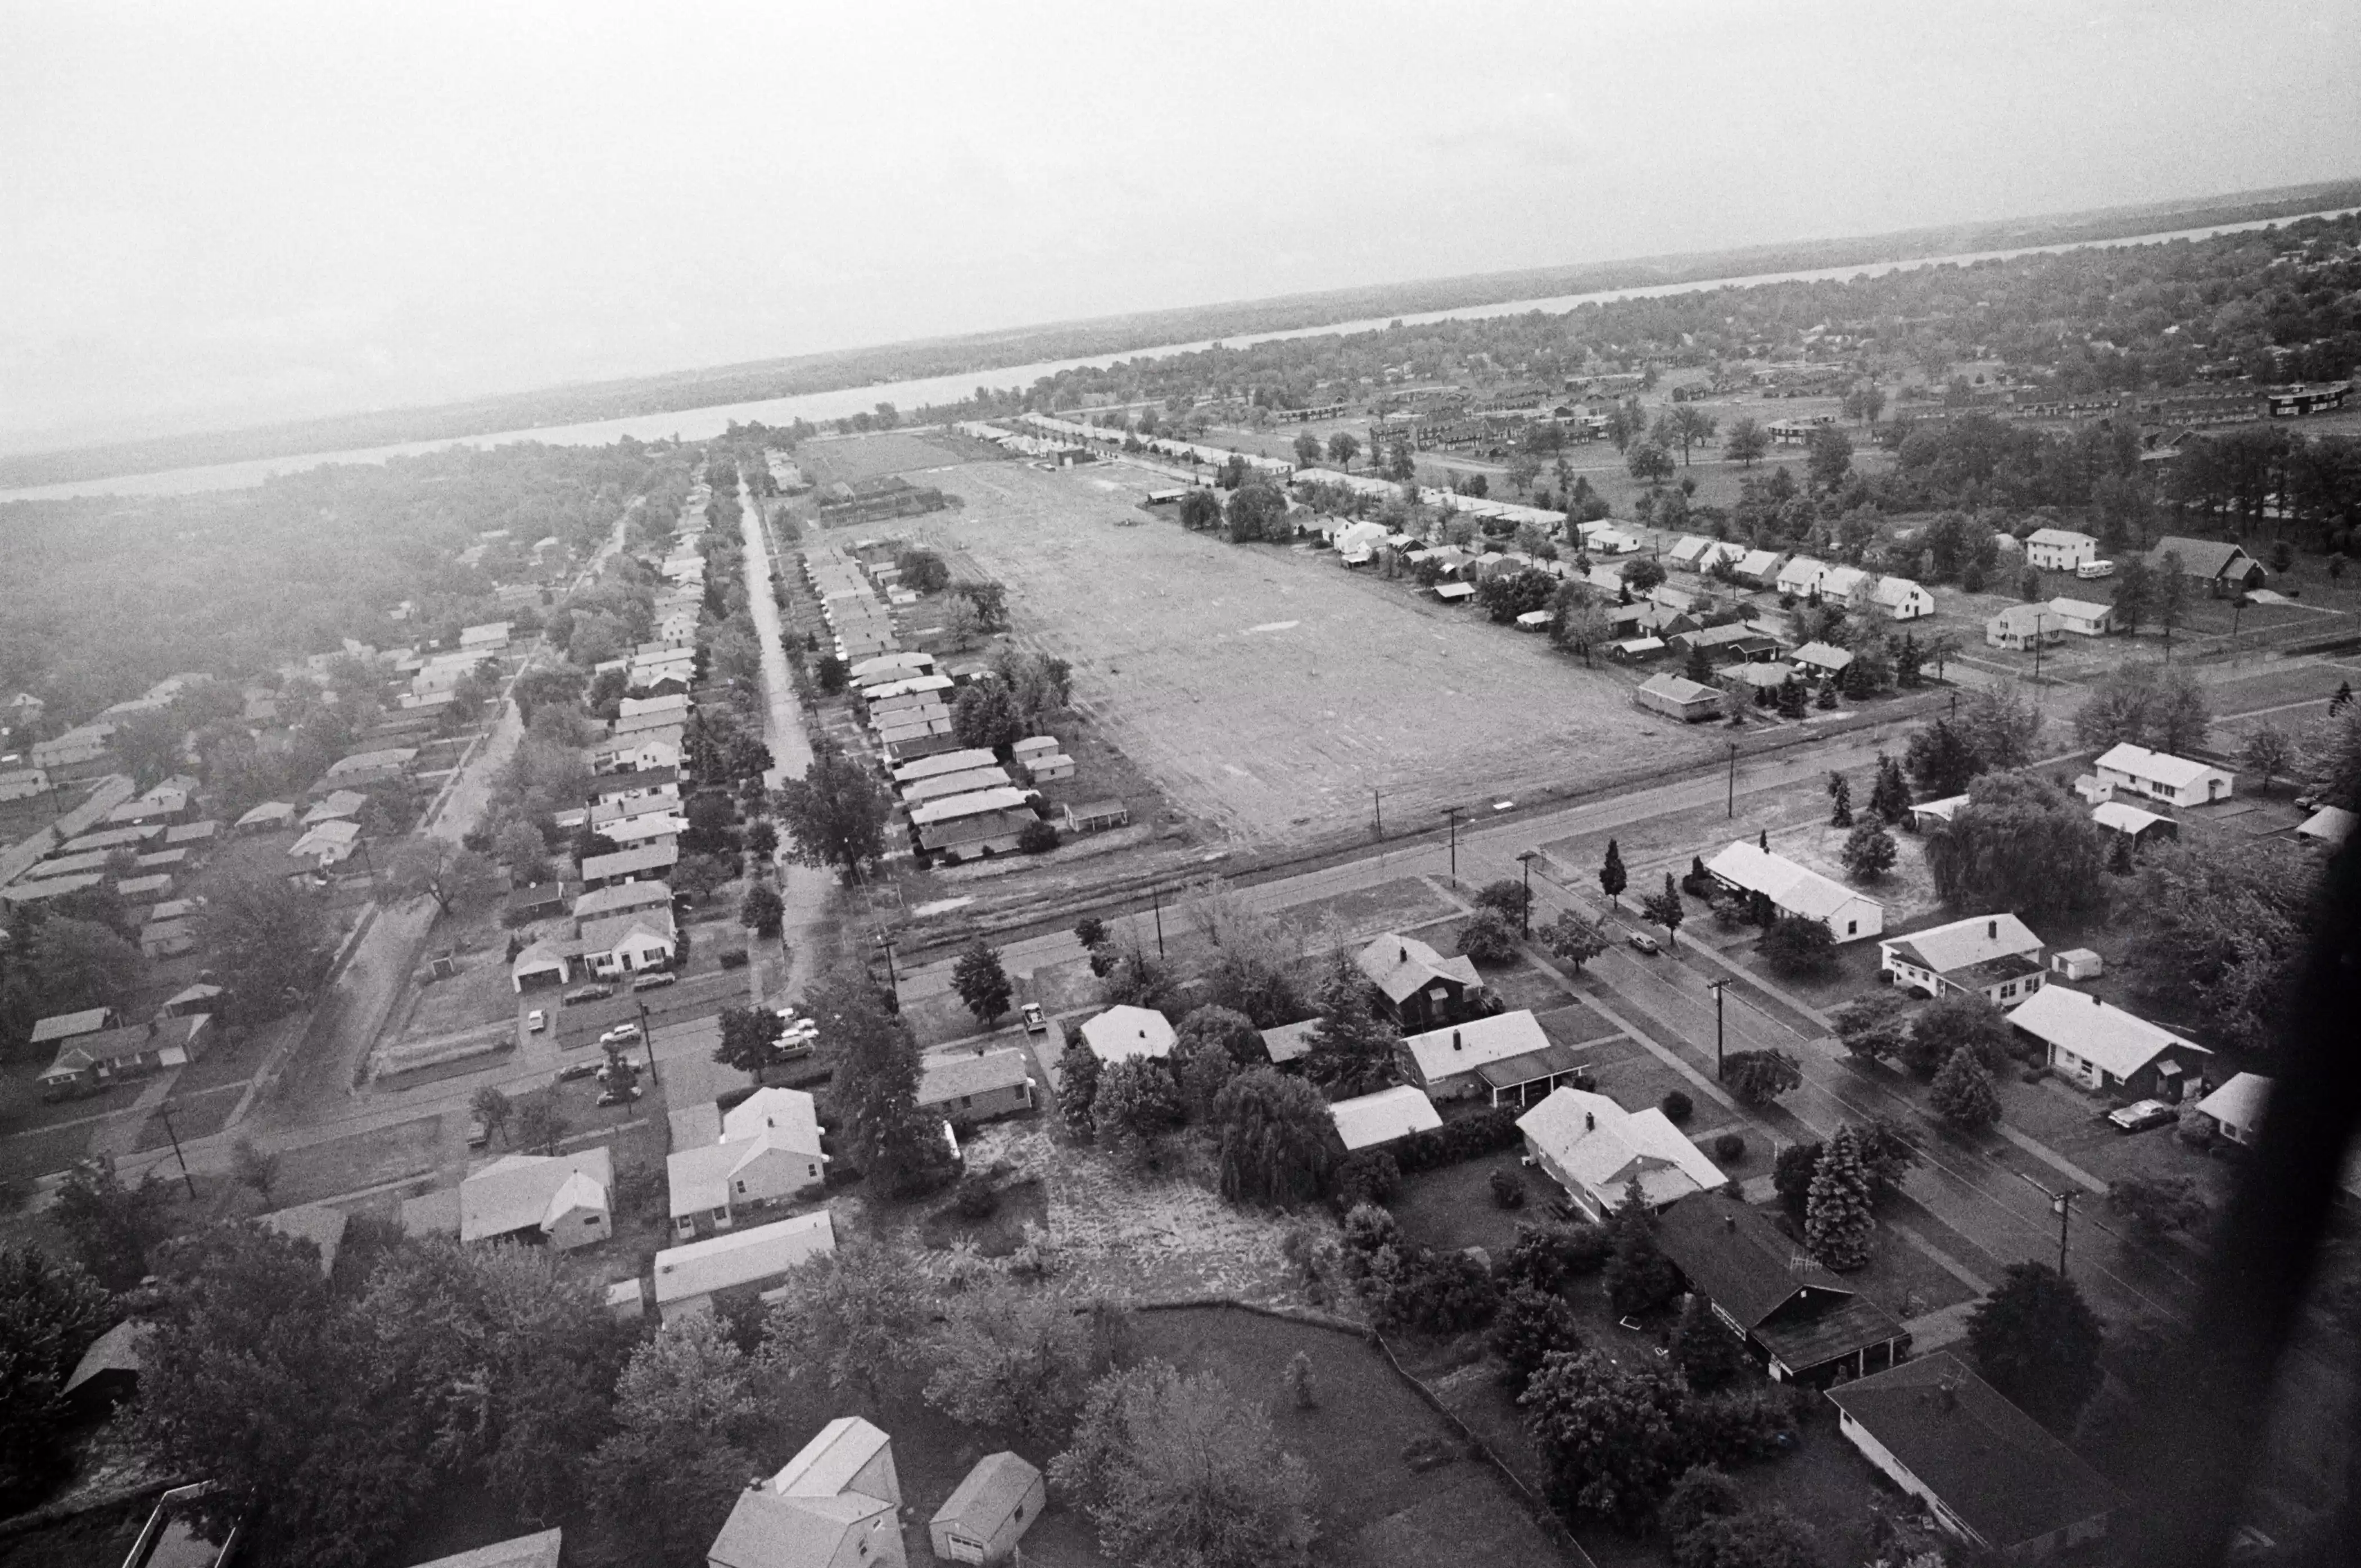 Aerial view of abandoned houses and buildings in Love Canal neighborhood